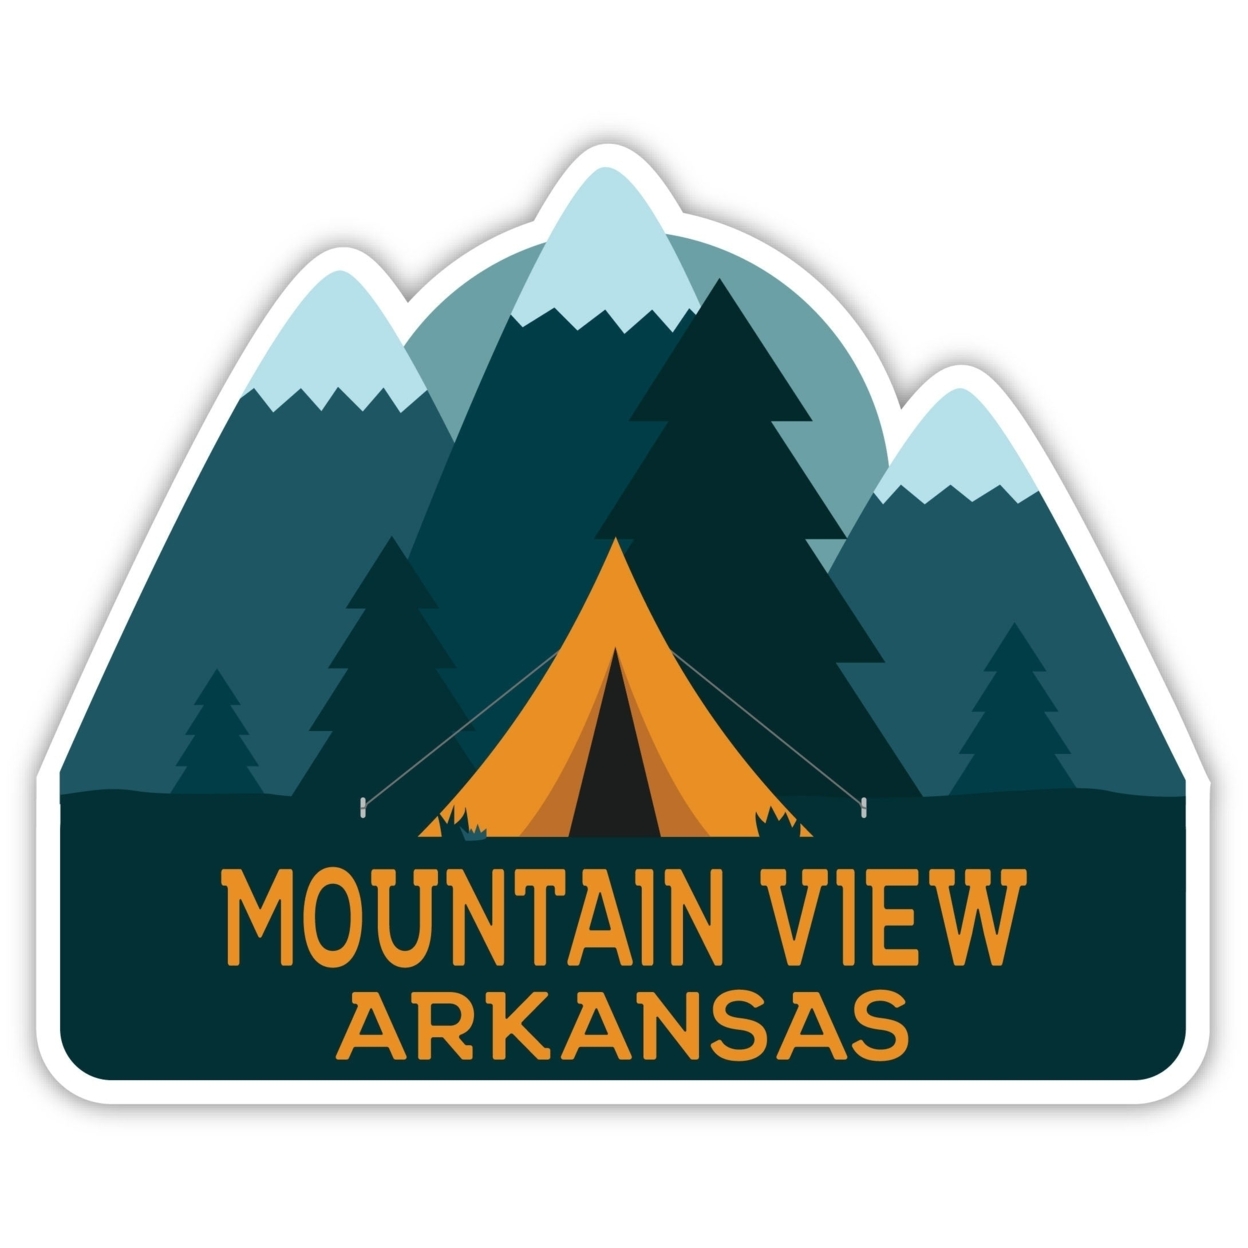 Mountain View Arkansas Souvenir Decorative Stickers (Choose Theme And Size) - Single Unit, 4-Inch, Great Outdoors